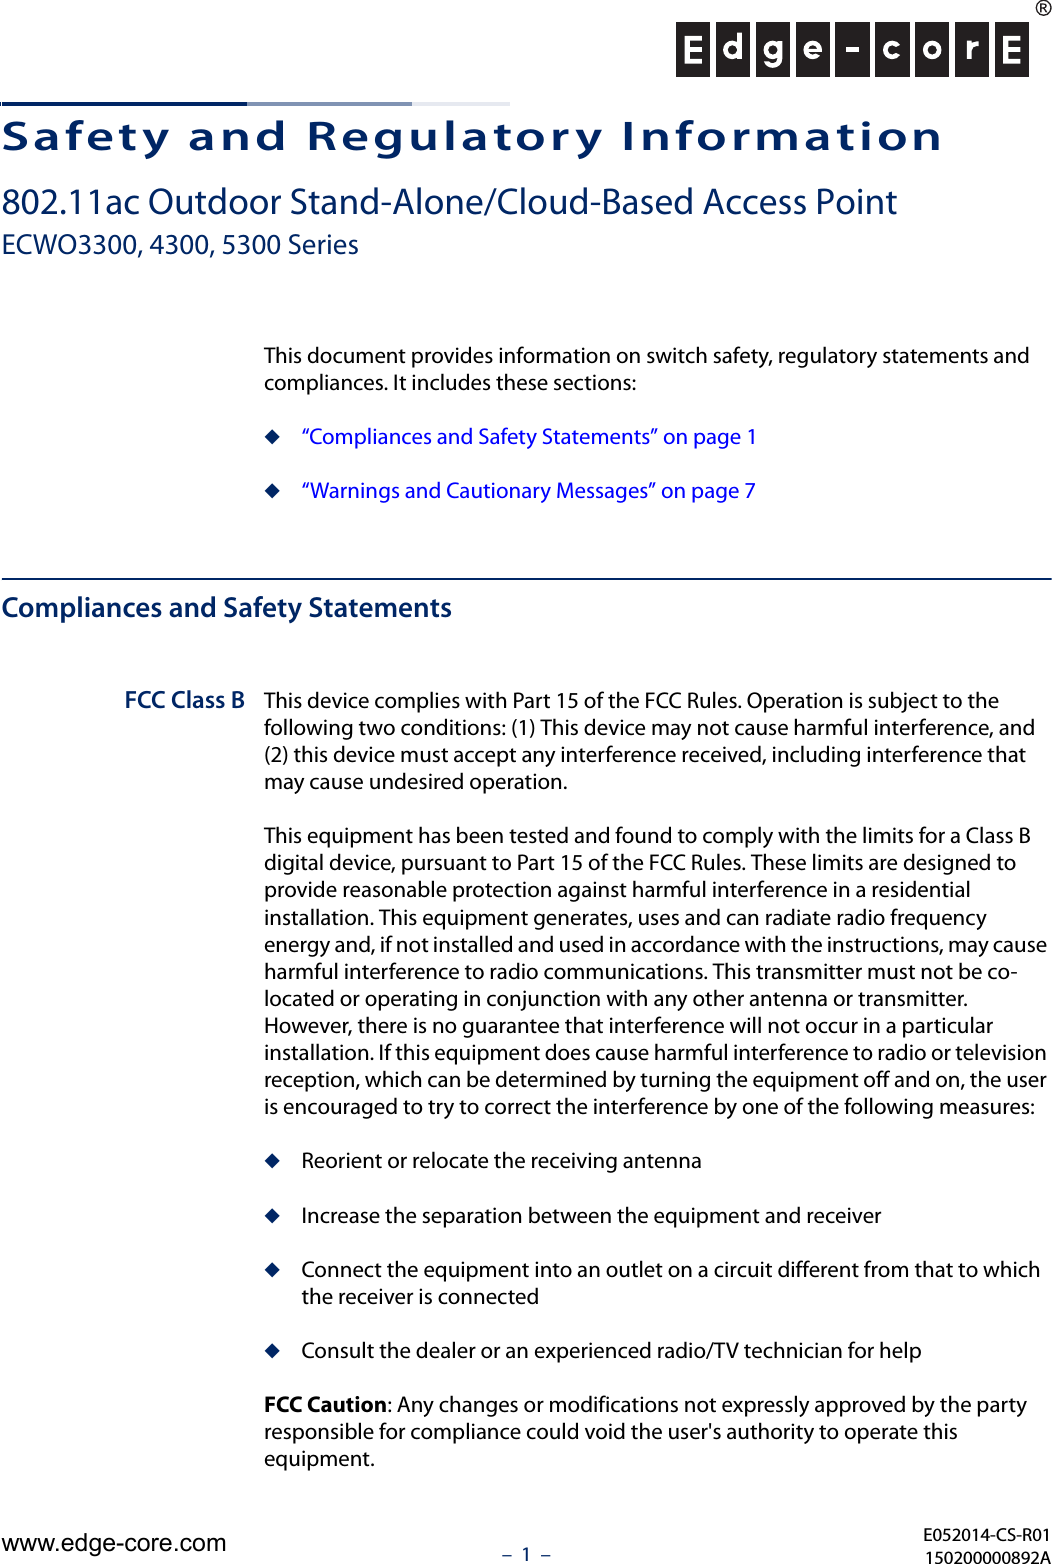 –  1  –Safety and Regulatory Information802.11ac Outdoor Stand-Alone/Cloud-Based Access PointECWO3300, 4300, 5300 SeriesThis document provides information on switch safety, regulatory statements and compliances. It includes these sections:◆“Compliances and Safety Statements” on page 1◆“Warnings and Cautionary Messages” on page 7Compliances and Safety StatementsFCC Class B This device complies with Part 15 of the FCC Rules. Operation is subject to the following two conditions: (1) This device may not cause harmful interference, and (2) this device must accept any interference received, including interference that may cause undesired operation.This equipment has been tested and found to comply with the limits for a Class B digital device, pursuant to Part 15 of the FCC Rules. These limits are designed to provide reasonable protection against harmful interference in a residential installation. This equipment generates, uses and can radiate radio frequency energy and, if not installed and used in accordance with the instructions, may cause harmful interference to radio communications. This transmitter must not be co-located or operating in conjunction with any other antenna or transmitter. However, there is no guarantee that interference will not occur in a particular installation. If this equipment does cause harmful interference to radio or television reception, which can be determined by turning the equipment off and on, the user is encouraged to try to correct the interference by one of the following measures:◆Reorient or relocate the receiving antenna◆Increase the separation between the equipment and receiver◆Connect the equipment into an outlet on a circuit different from that to which the receiver is connected◆Consult the dealer or an experienced radio/TV technician for helpFCC Caution: Any changes or modifications not expressly approved by the party responsible for compliance could void the user&apos;s authority to operate this equipment. E052014-CS-R01150200000892Awww.edge-core.com